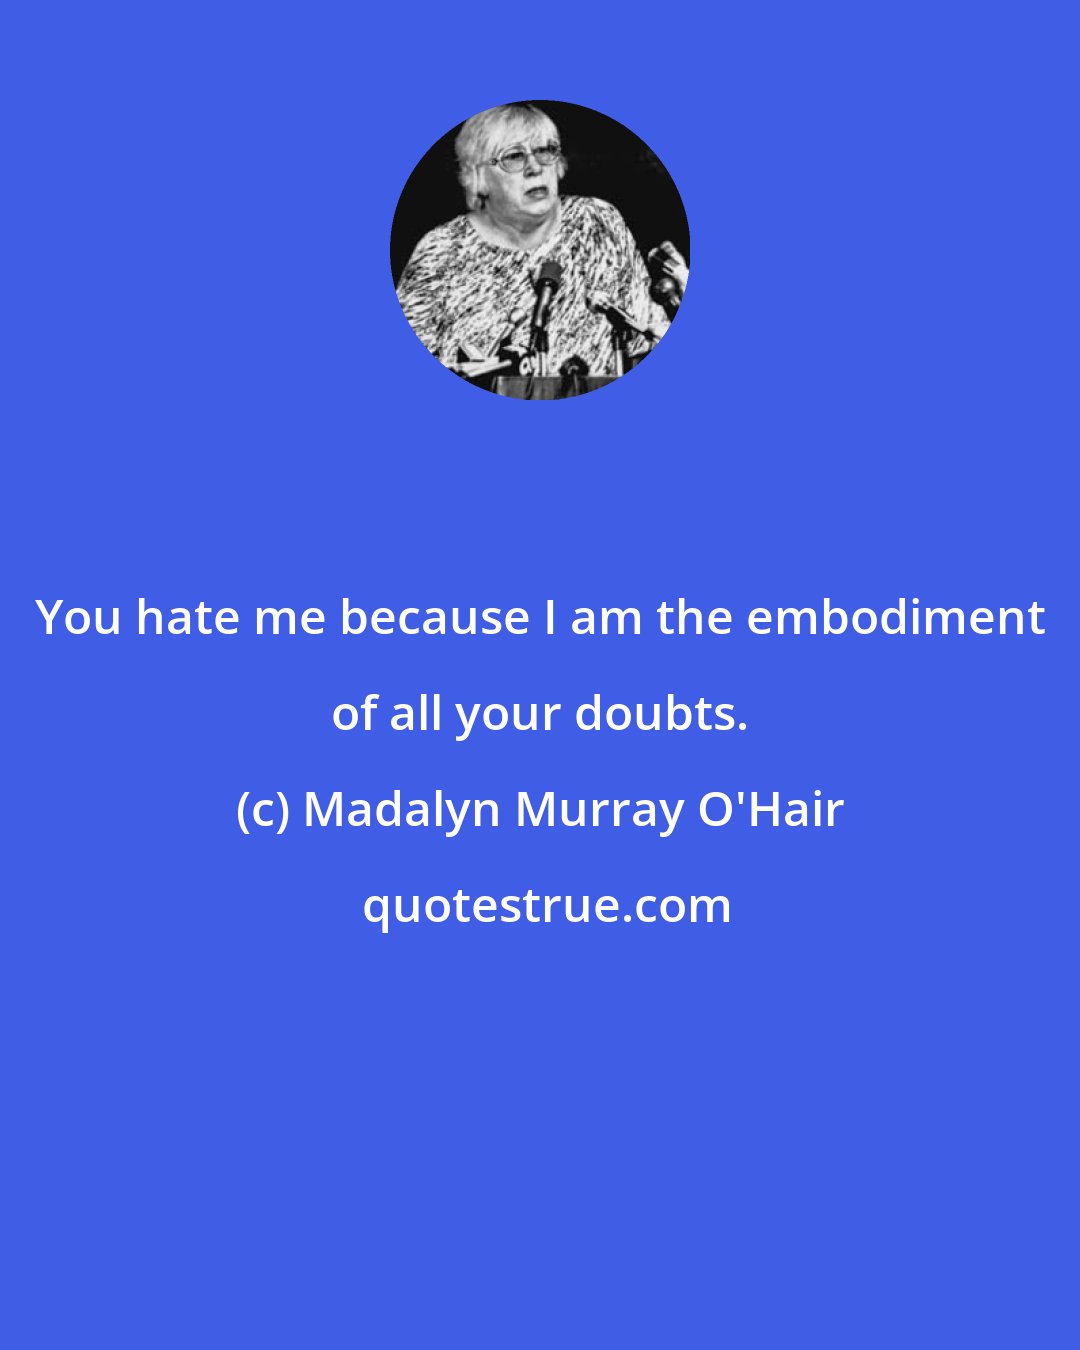 Madalyn Murray O'Hair: You hate me because I am the embodiment of all your doubts.